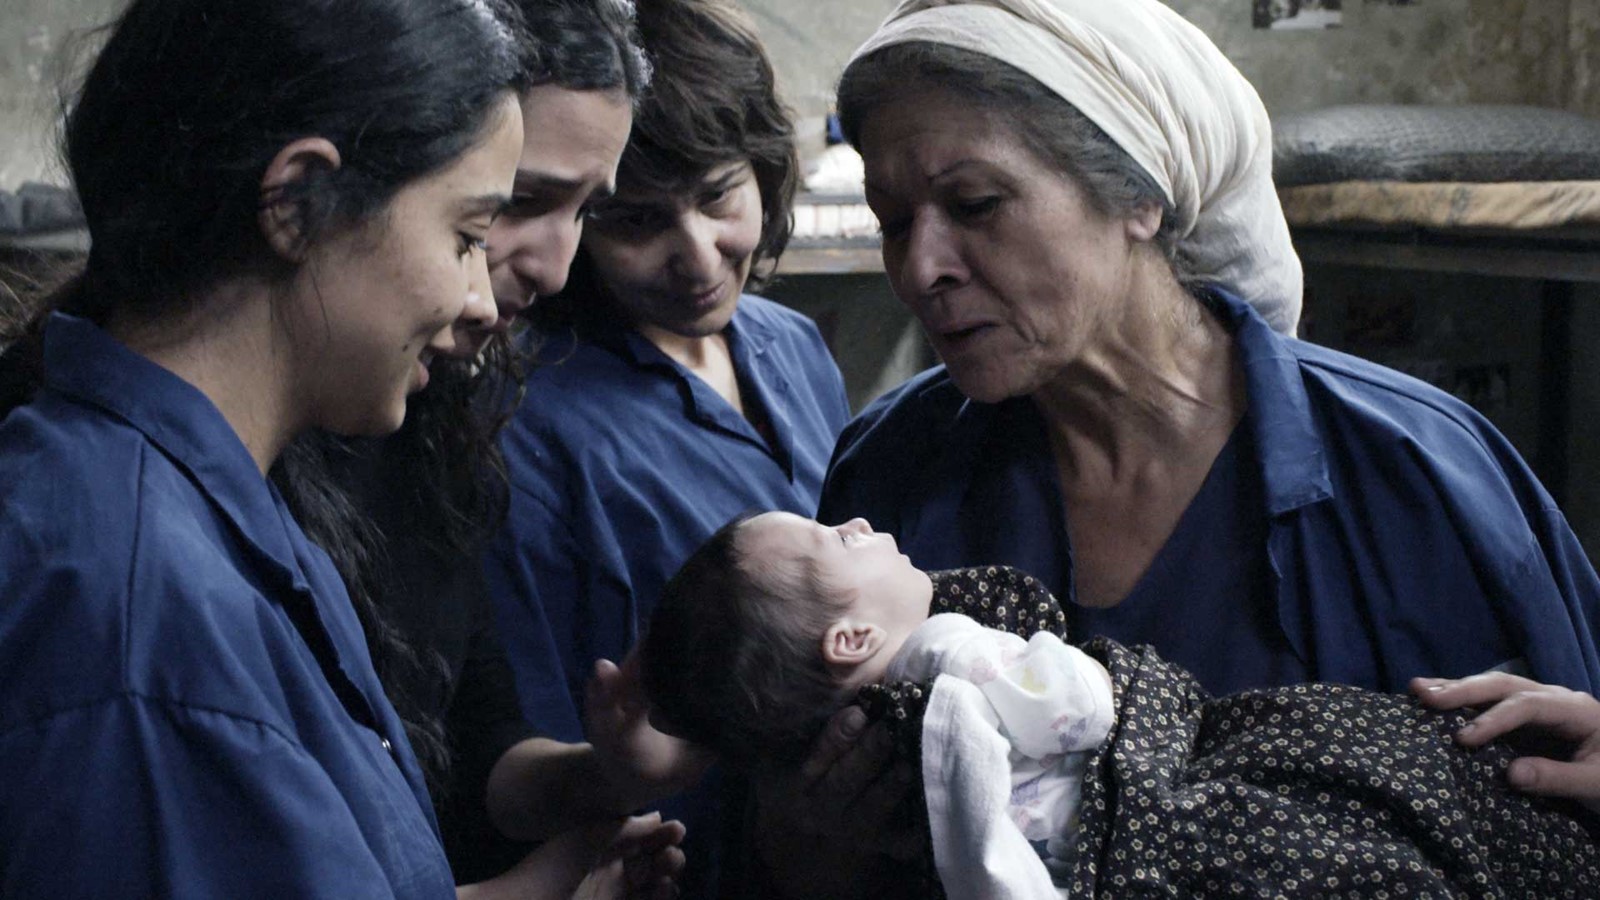 4. "3000 Nights" (2015) Inspired by true events, "3000 Nights" is the story of Layal, a Palestinian school teacher who finds herself wrongfully imprisoned in an Israeli jail while pregnant. The film chronicles her determination to shield her child within the prison walls, highlighting the struggles faced by Palestinian women in confinement.